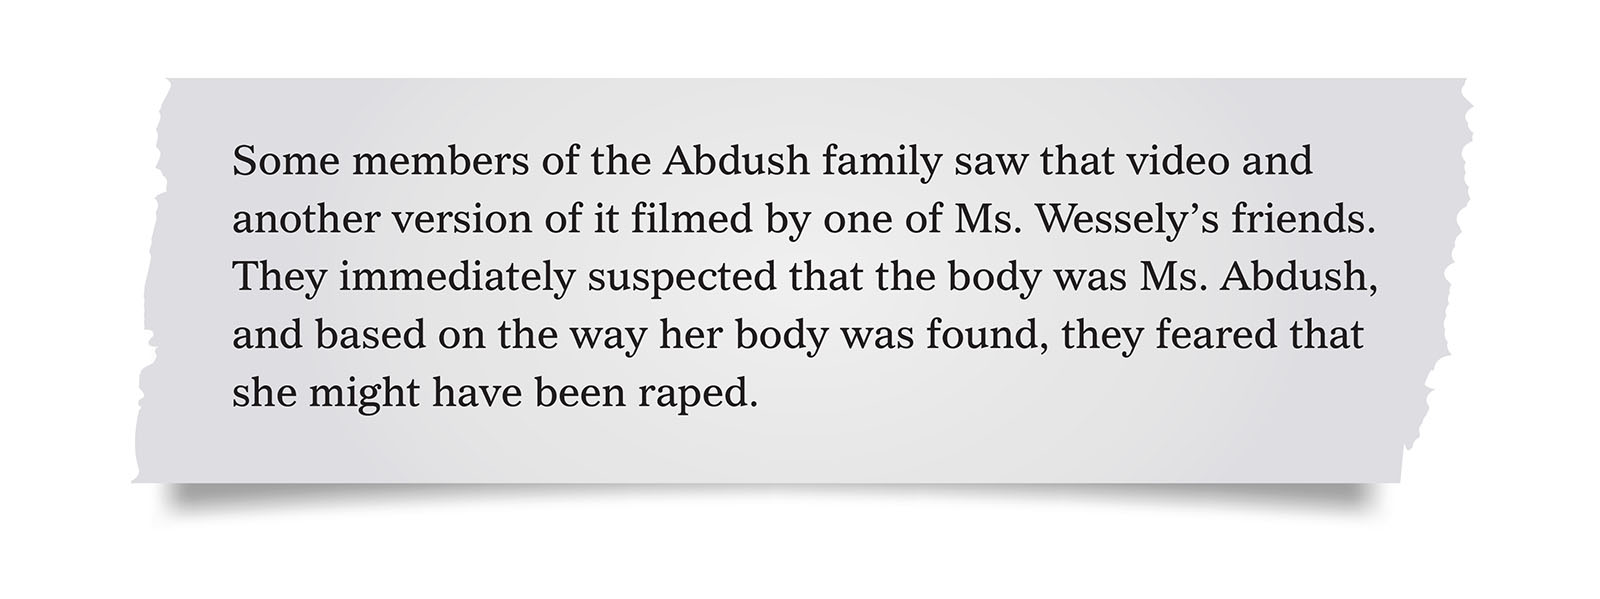 Pull quote:
Some members of the Abdush family saw that video and another version of it filmed by one of Ms. Wessely’s friends. They immediately suspected that the body was Ms. Abdush, and based on the way her body was found, they feared that she might have been raped.